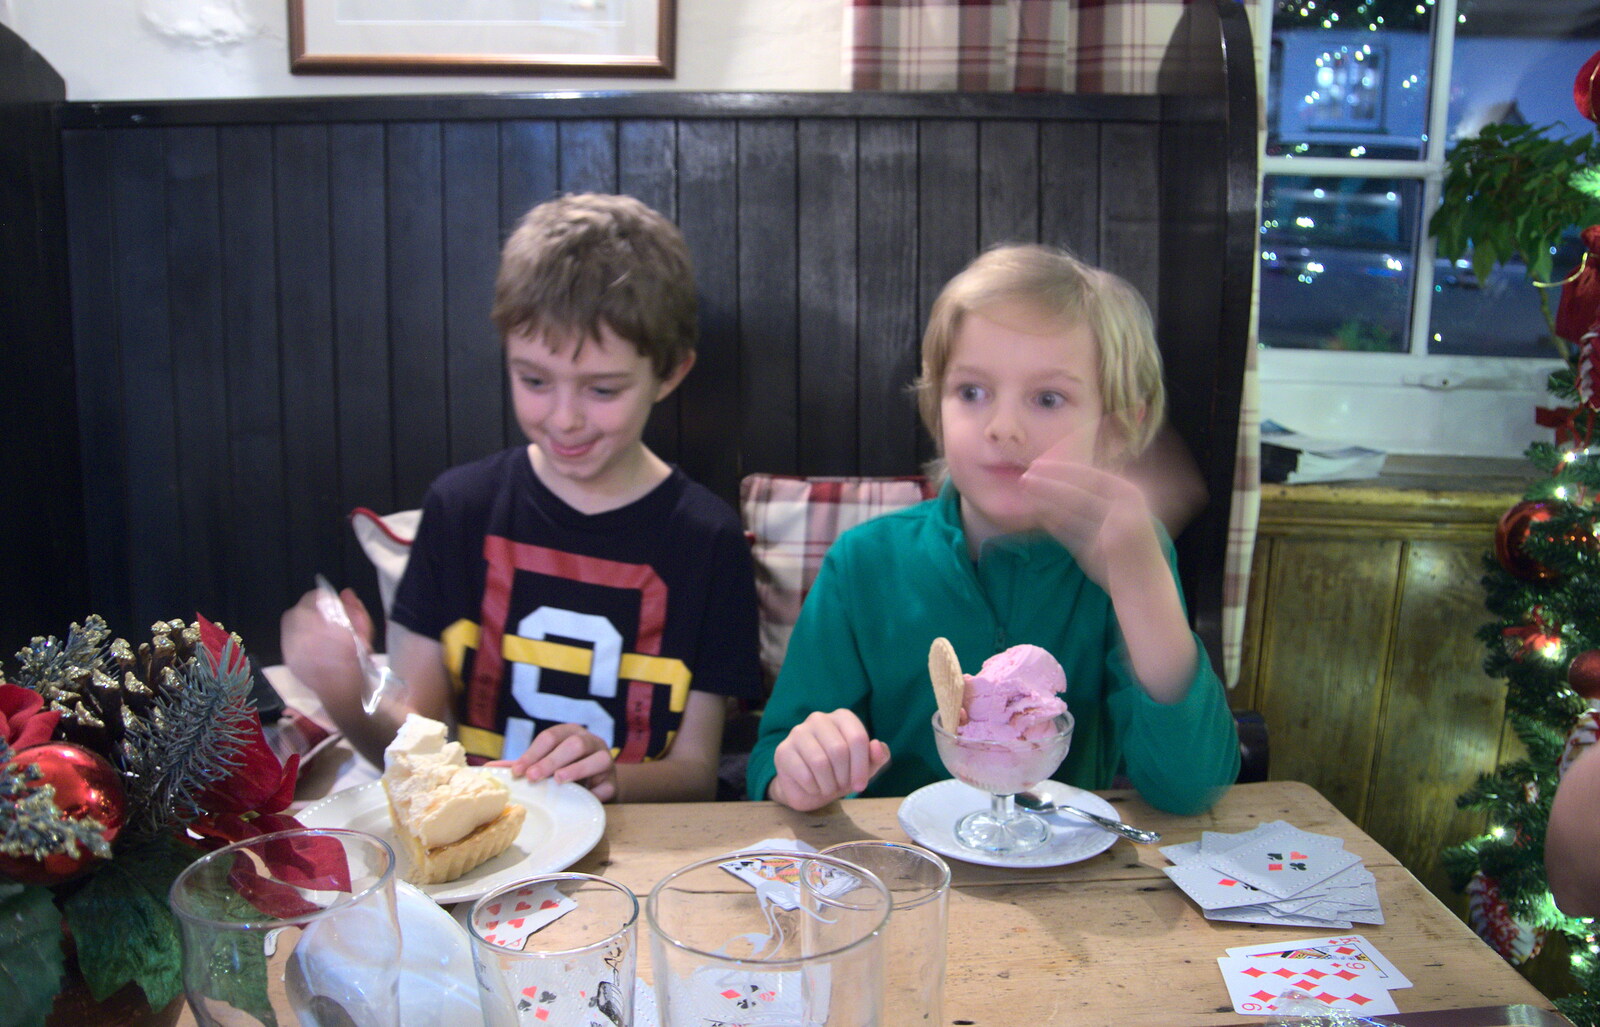 The boys are excited by their puddings from Christmas at Grandma J's, Spreyton, Devon - 25th December 2018